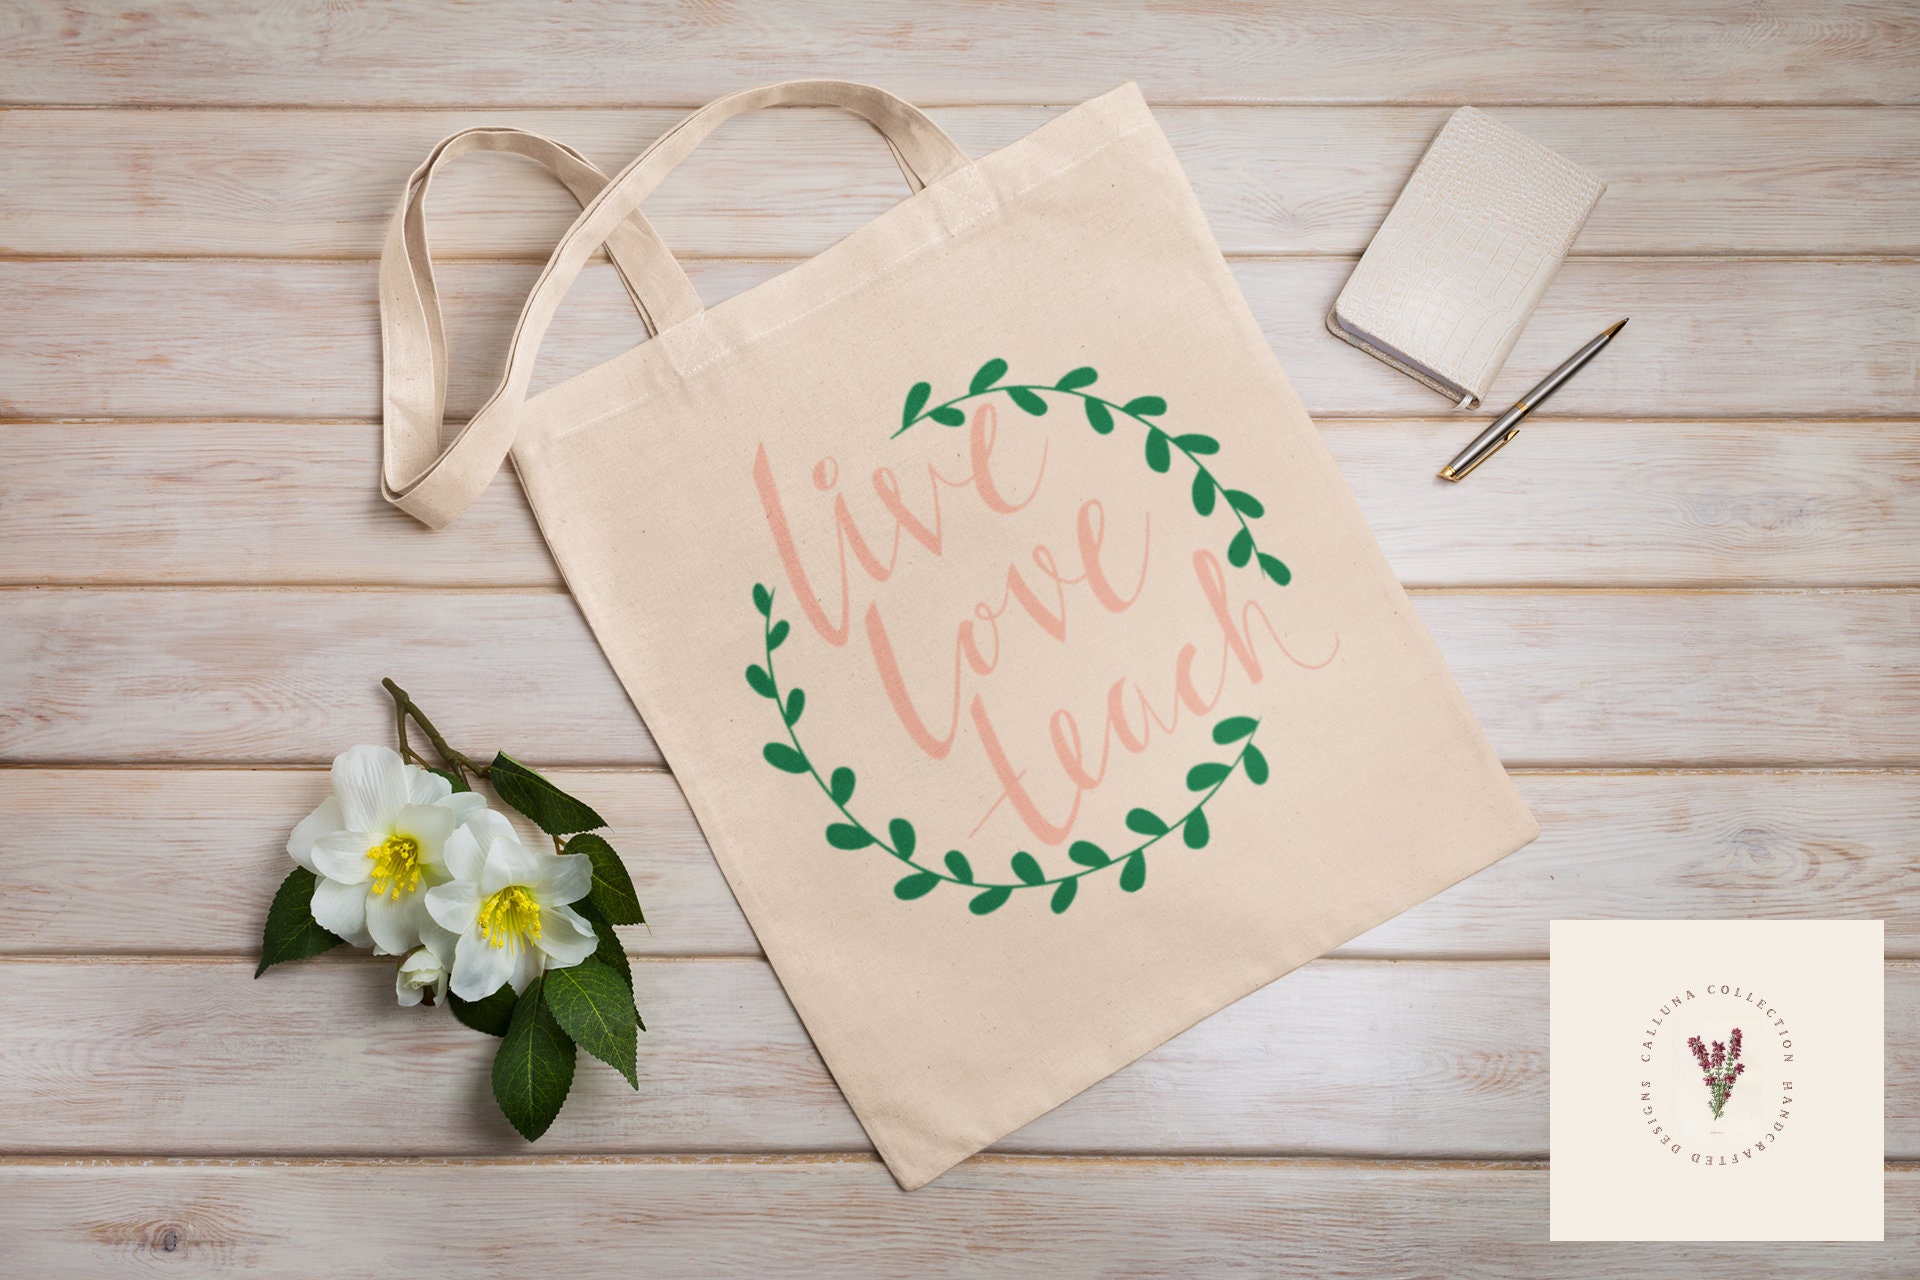 The classic canvas bag – the perfect gift for Mother's Day. And